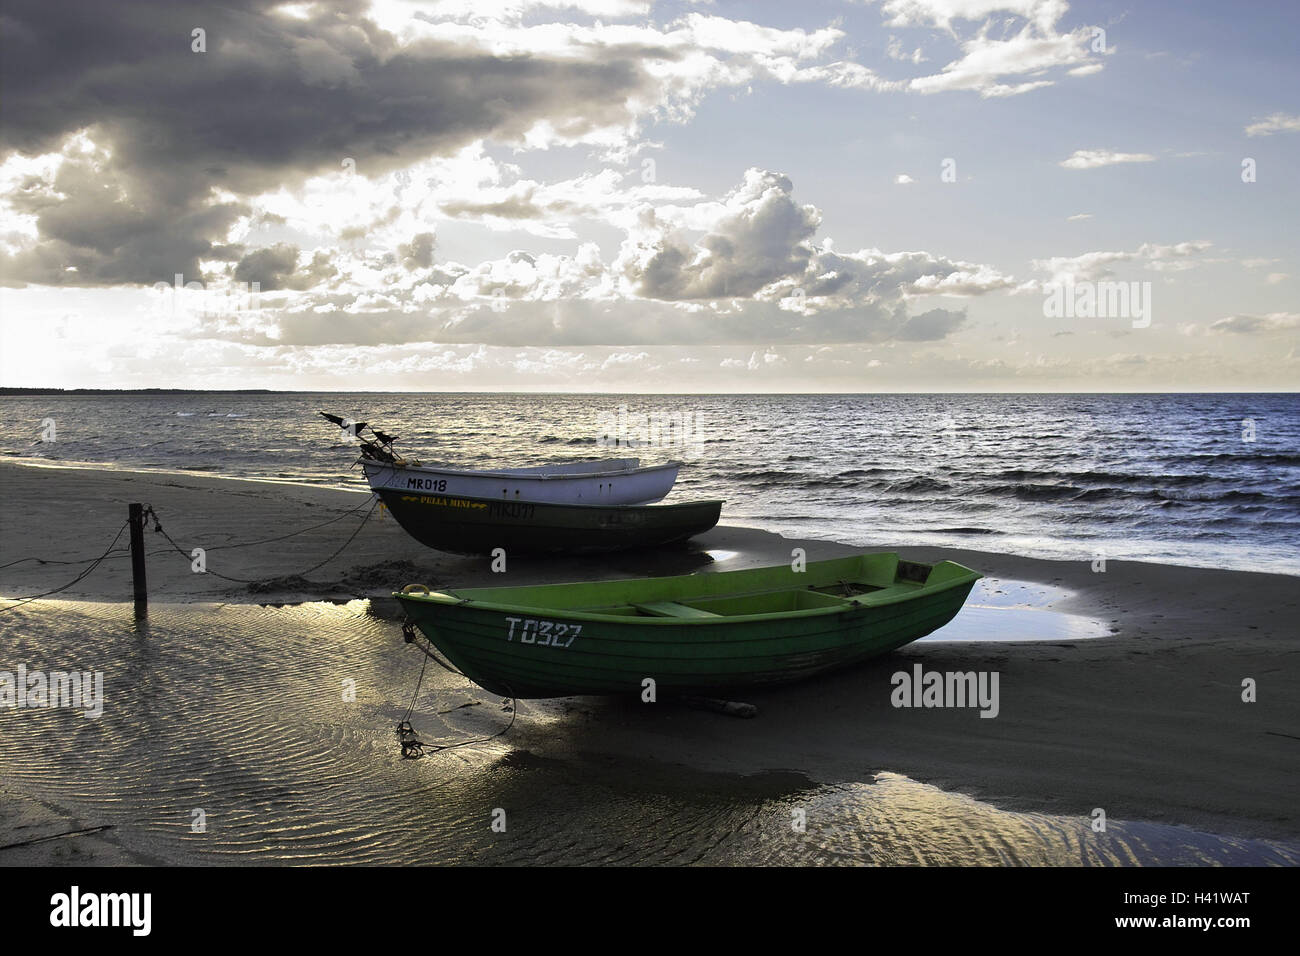 Beach, sea, ebb, boats, heavens,  Clouds, back light,  Series, cloud heavens, cloudy, clouds thunderclouds horizon boundlessly nature, landscape, loneliness, isolation, sandy beach, water, coast landscape, fisher boats, rowboats, concept, outlook, distance, wideness, mood, cloud mood, mood-full Stock Photo